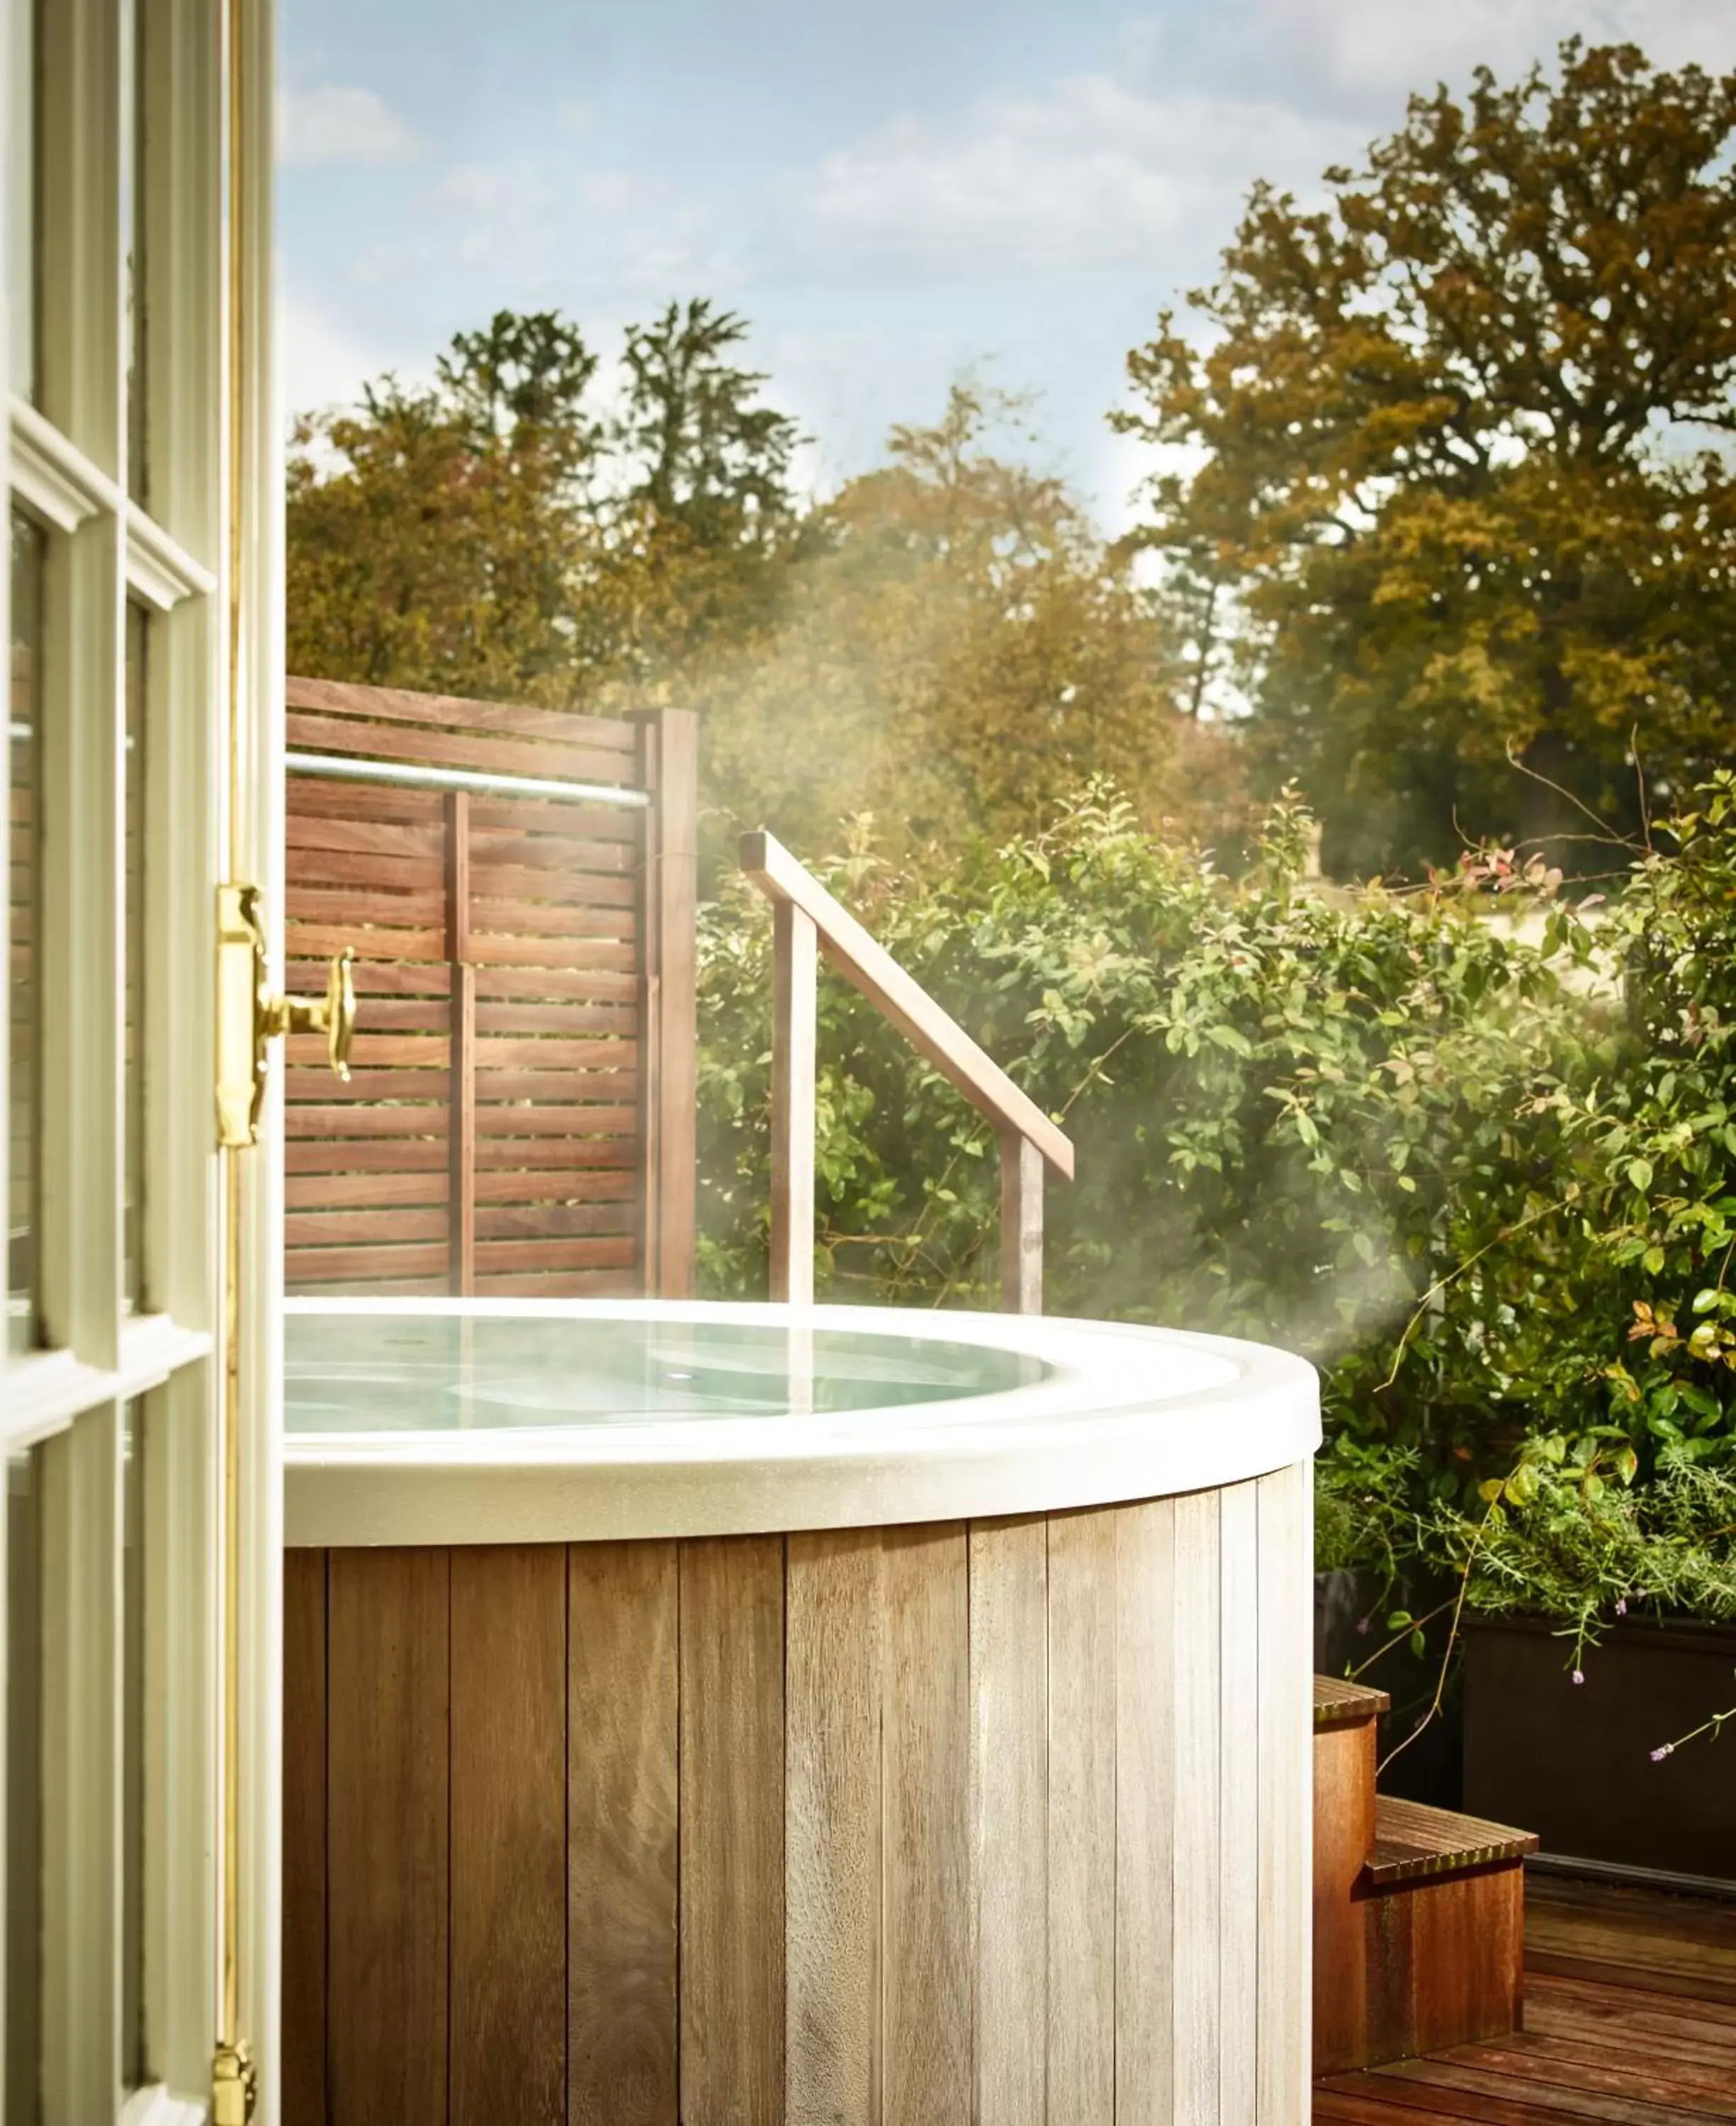 Hot Tub in Cliveden House - an Iconic Luxury Hotel